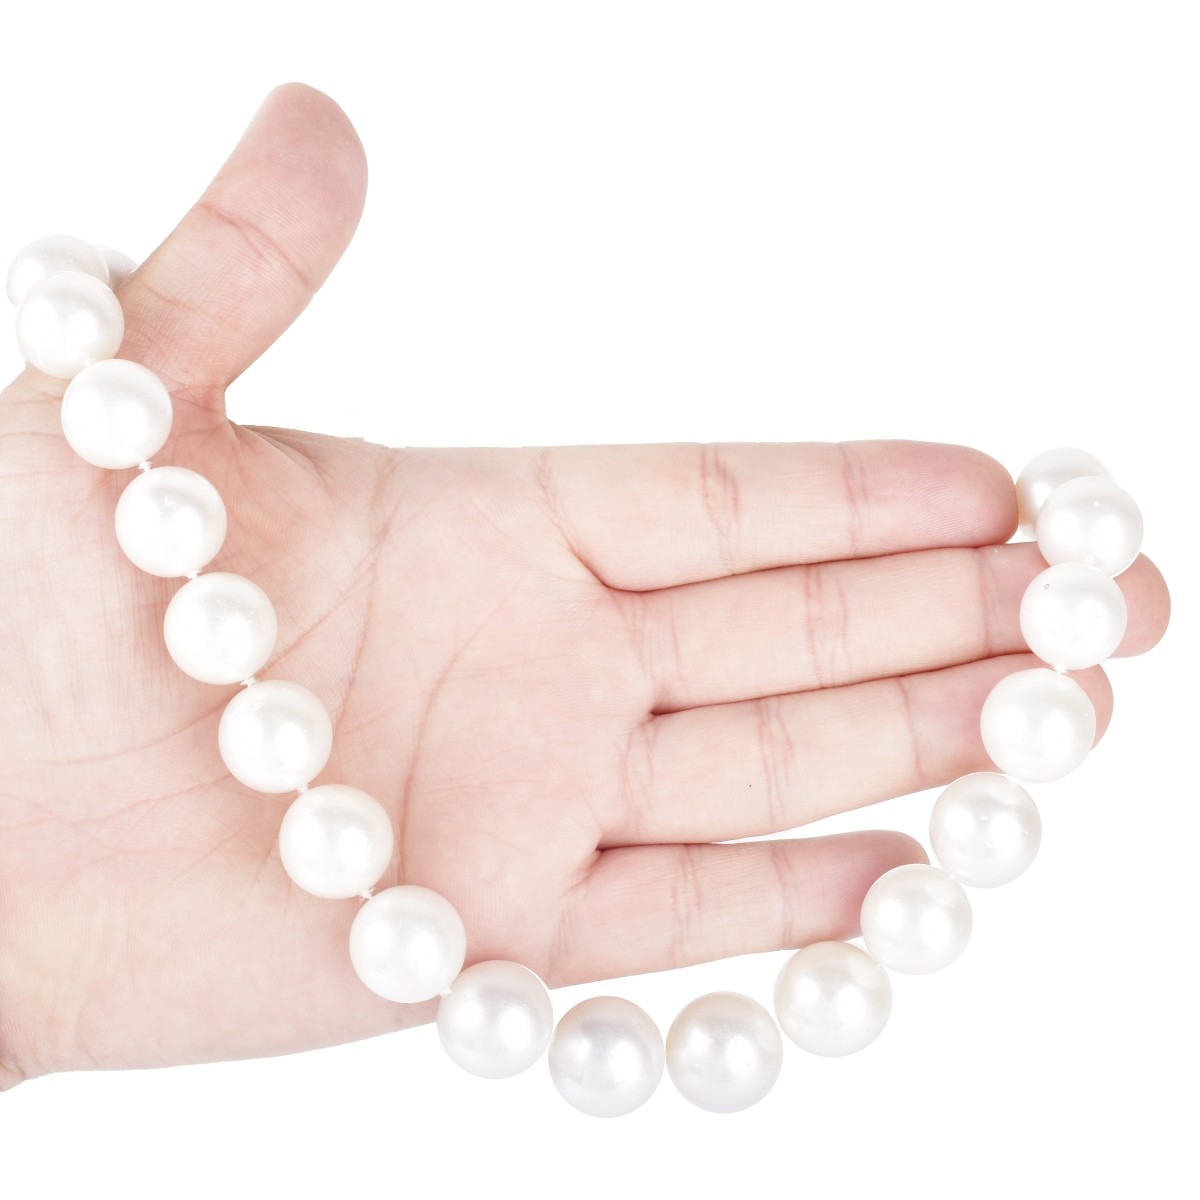 18.0-15.0mm South Sea Pearl Necklace